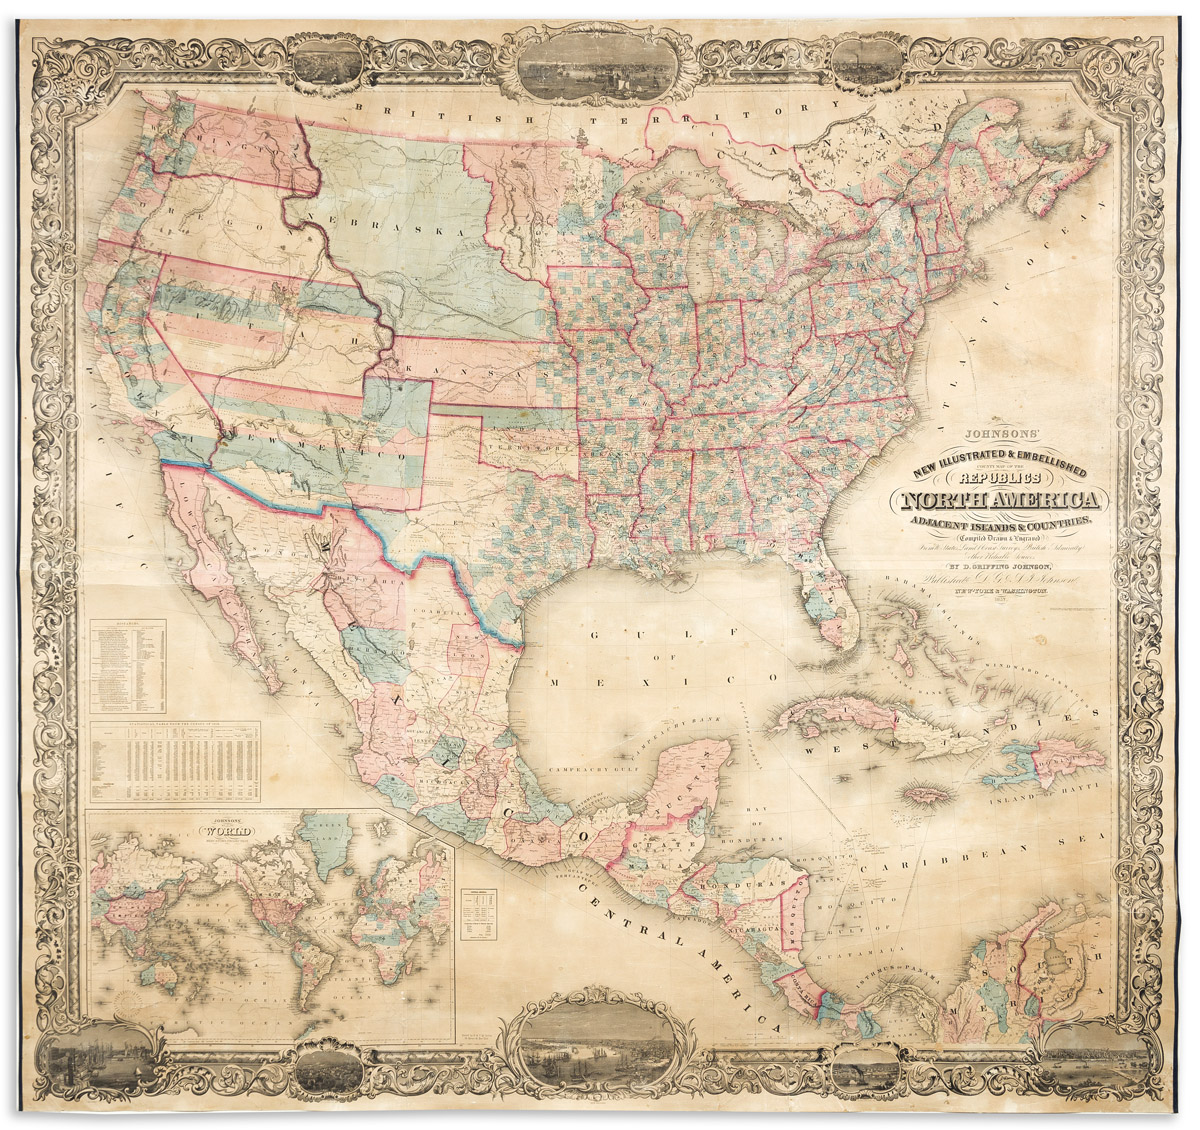 (NORTH AMERICA -- WALL MAP.) D. Griffing Johnson. Johnsons New Illustrated & Embellished County Map of the Republics of North America